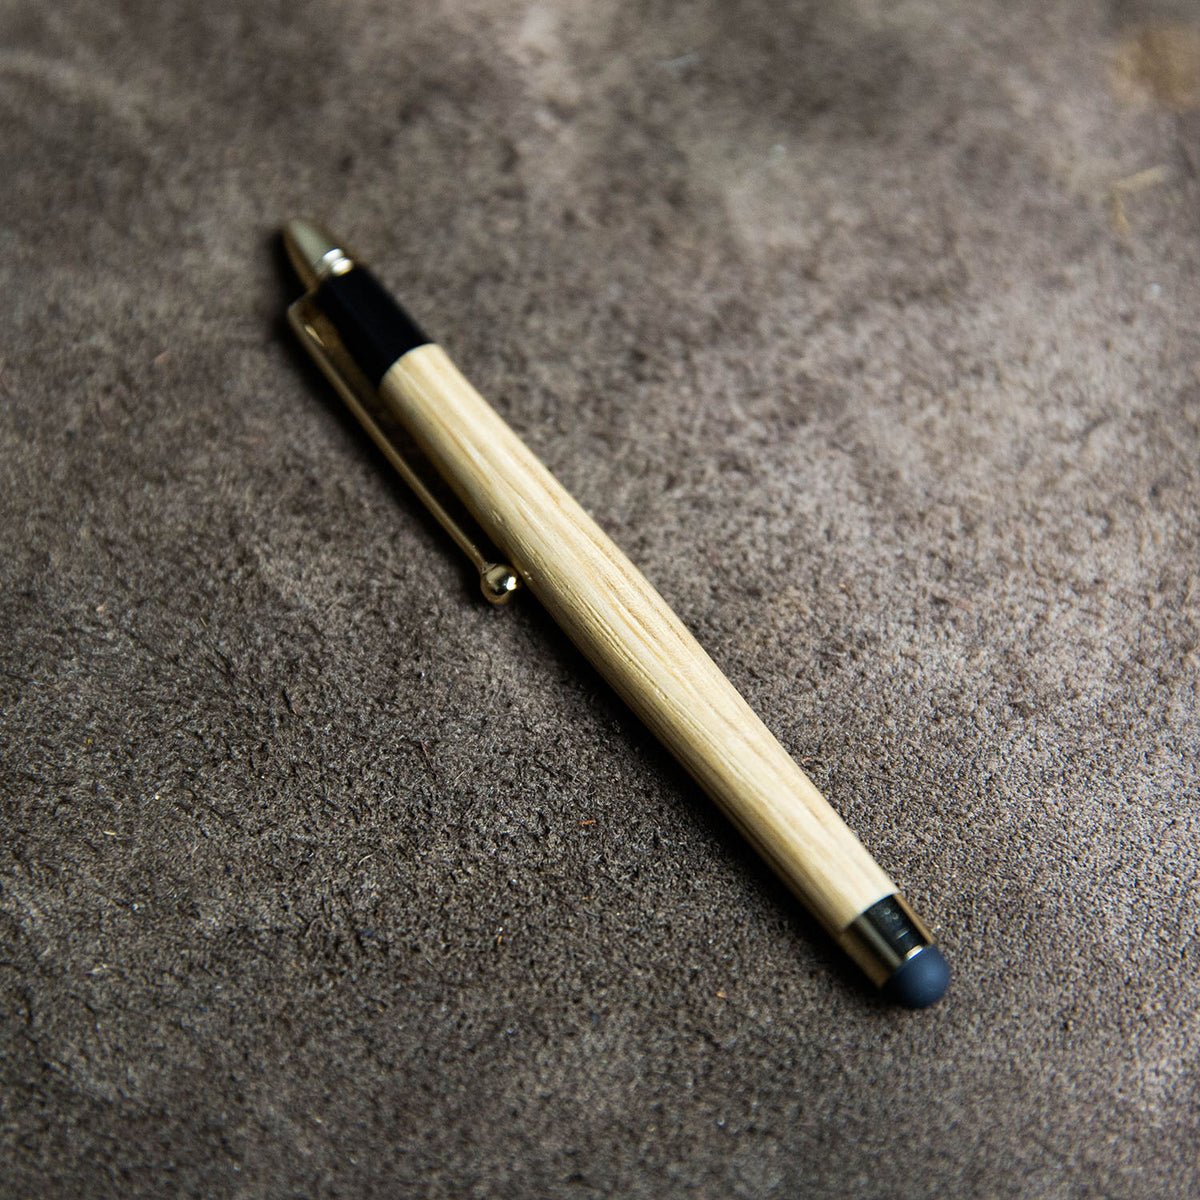 Stylus made of Tennessee Whiskey Barrel wood